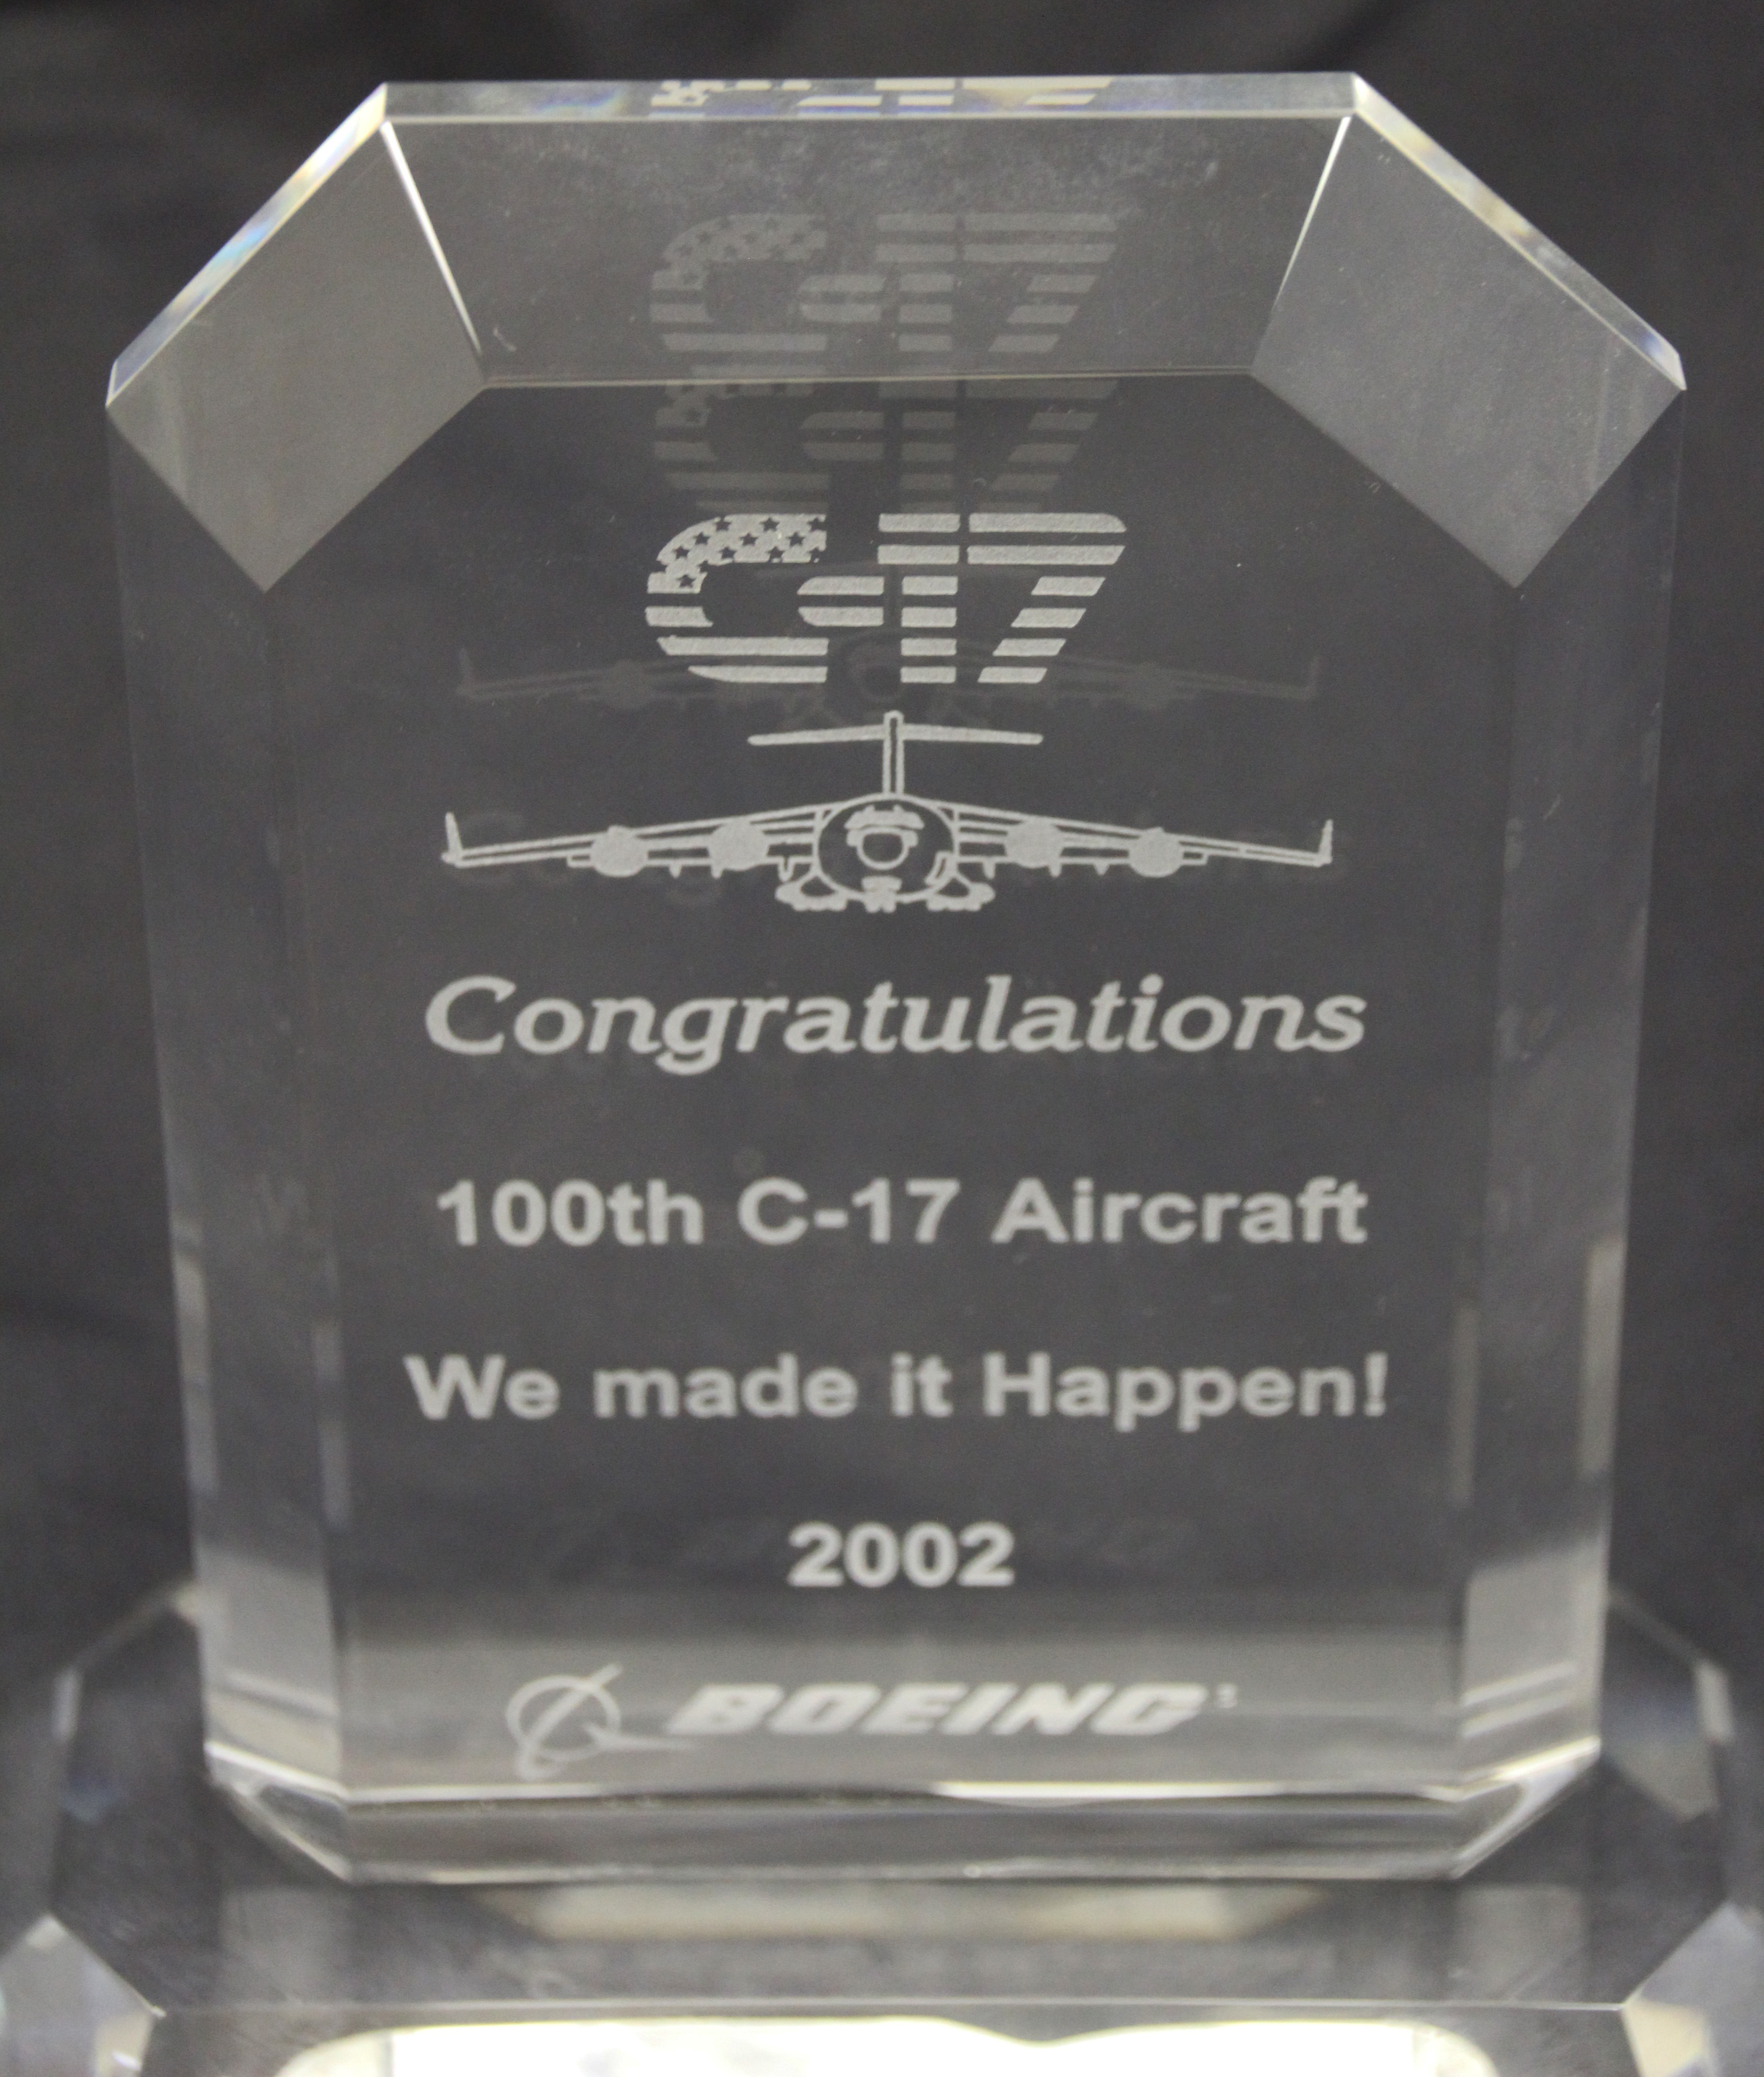 Award for the 100th C-17 Aircraft